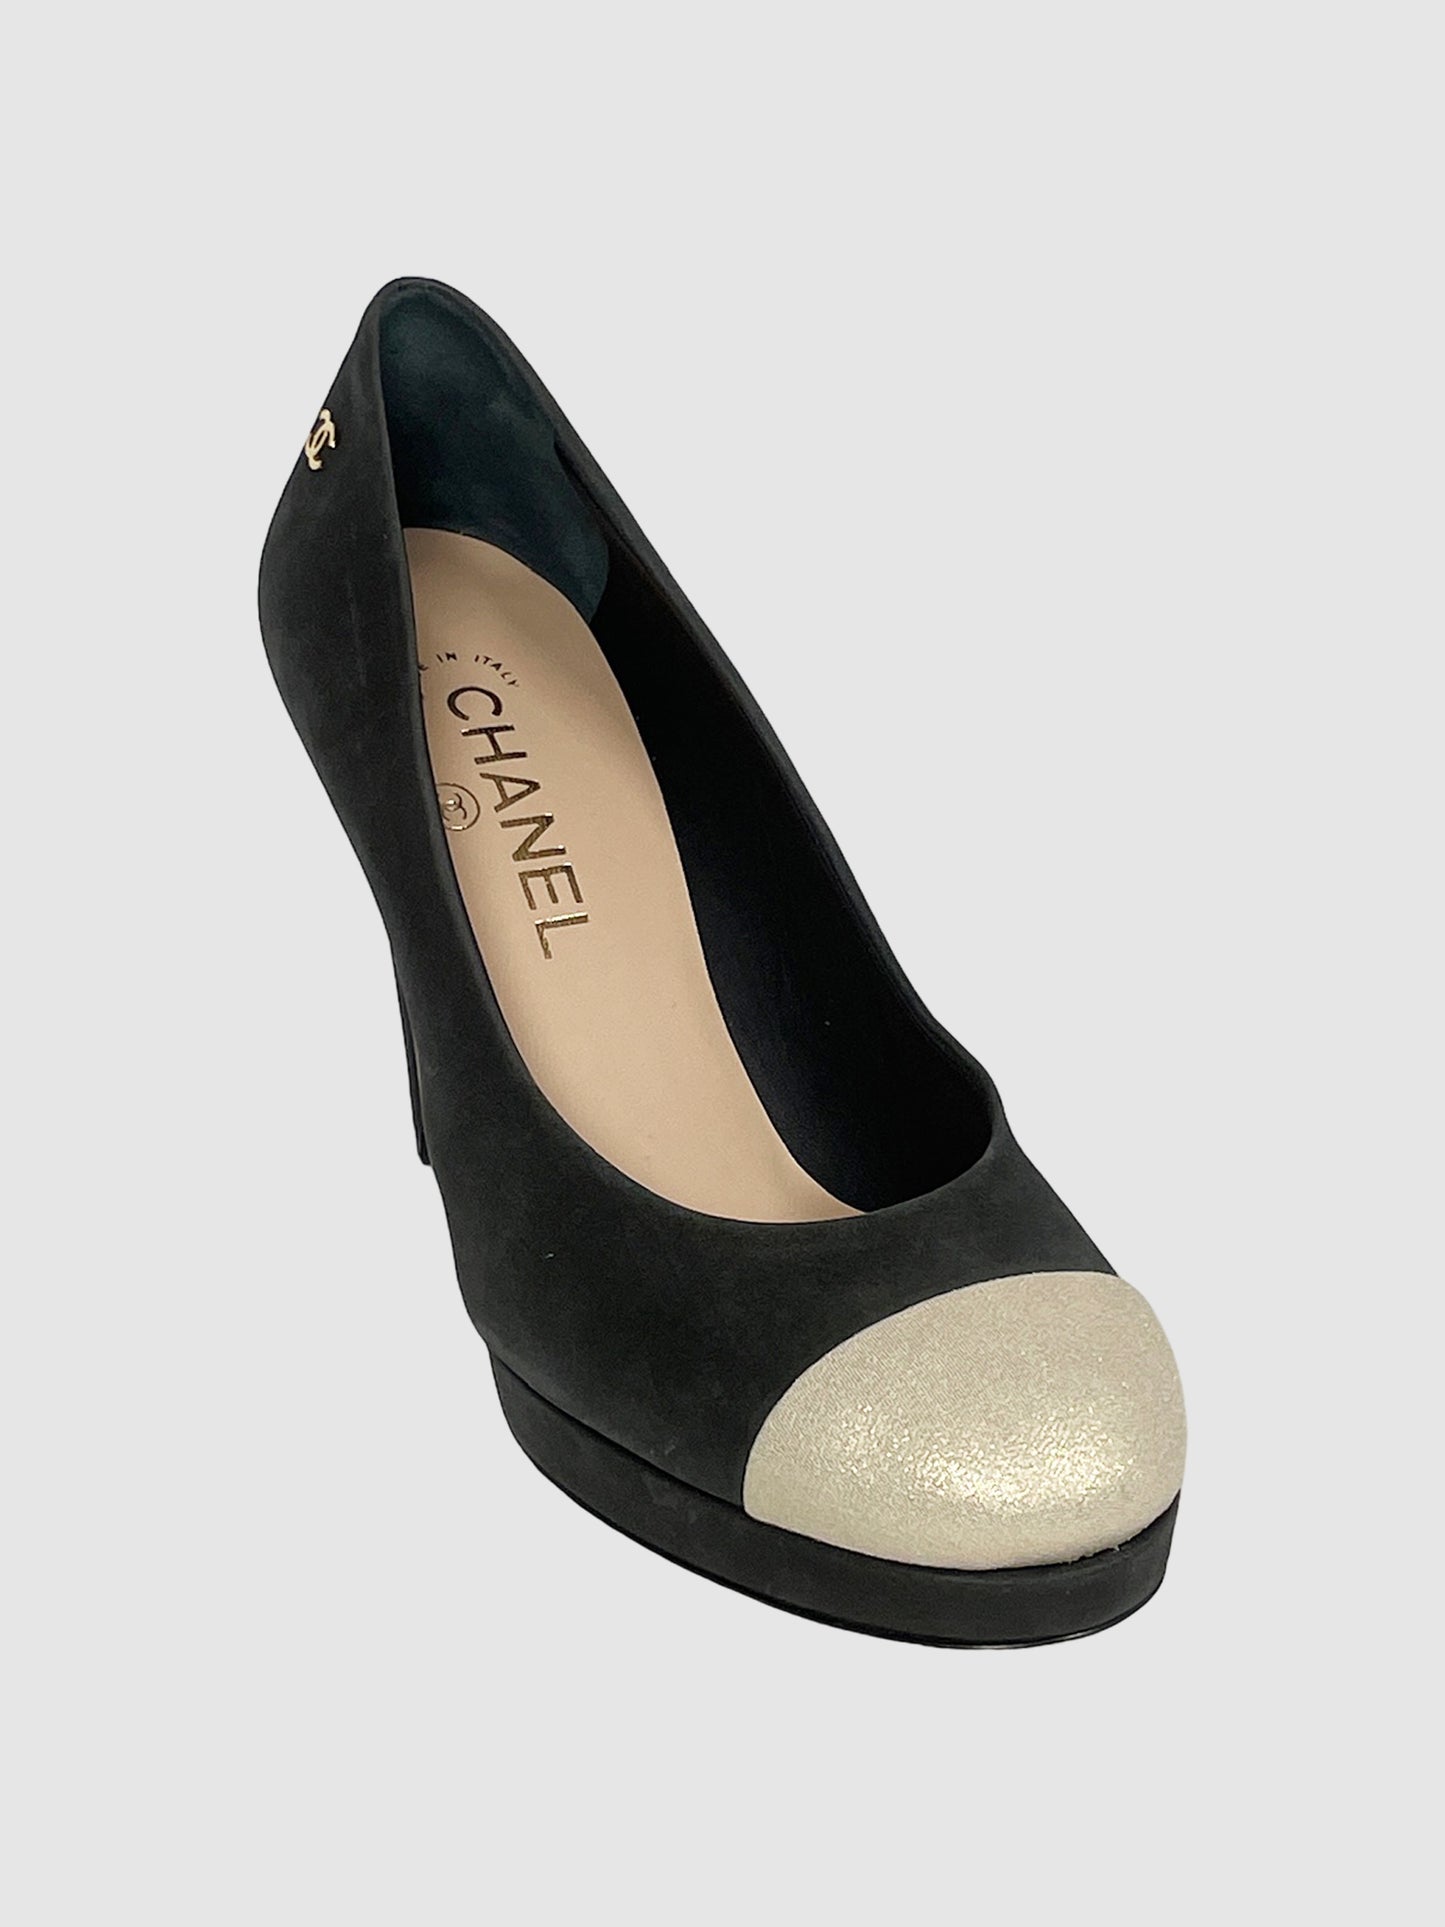 Shimmery Two-Tone CC Pumps - Size 37.5